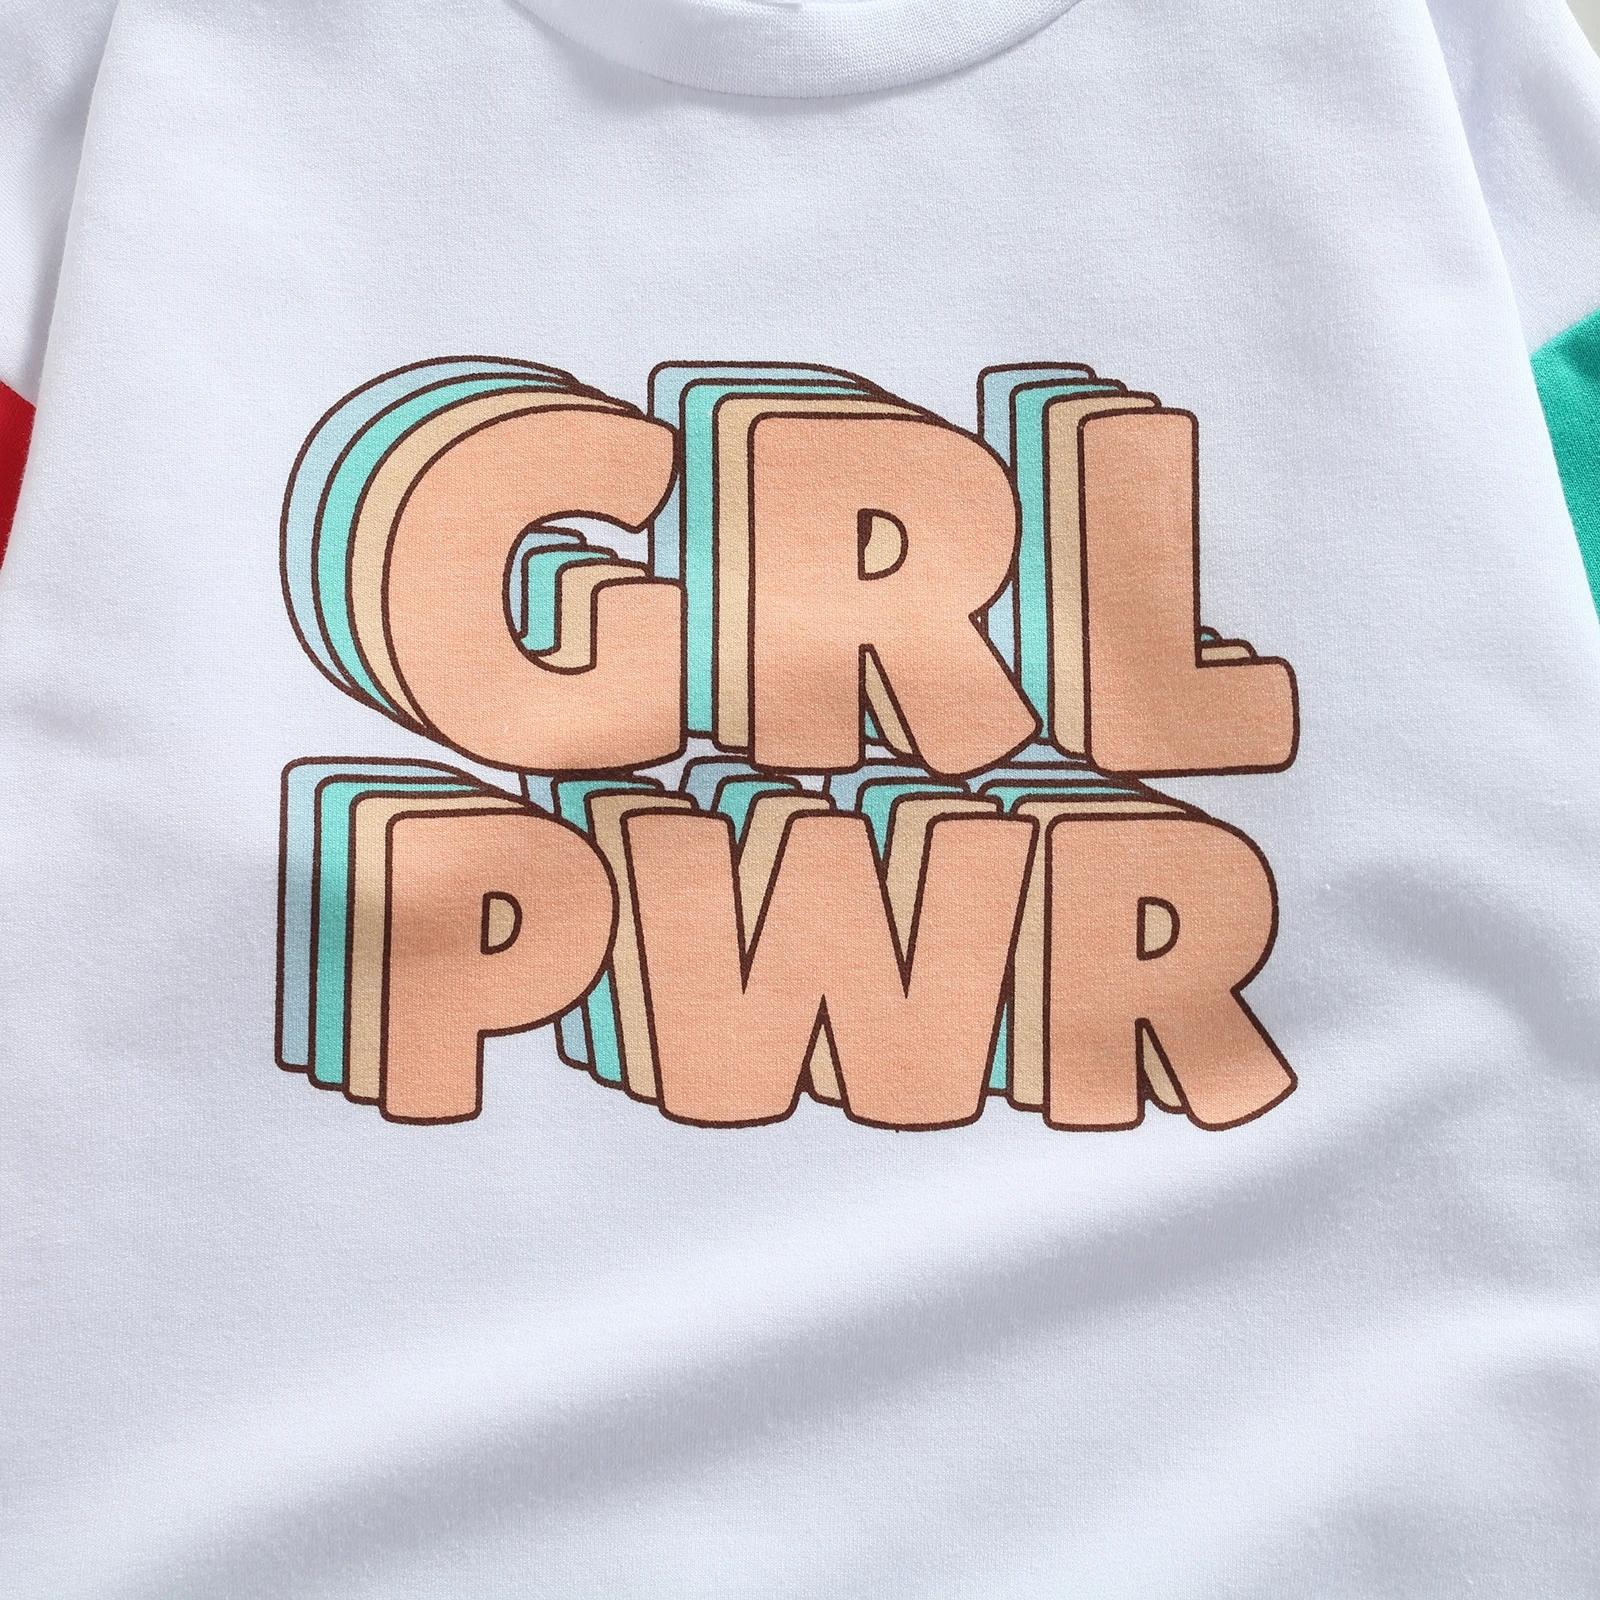 Ma&Baby 1-6Y Autumn Kids Baby Girls Sweatshirt GRL PWR Letter Printed Long Sleeve Pullover Tops Causal Children Clothes DD40 baby hooded shirt